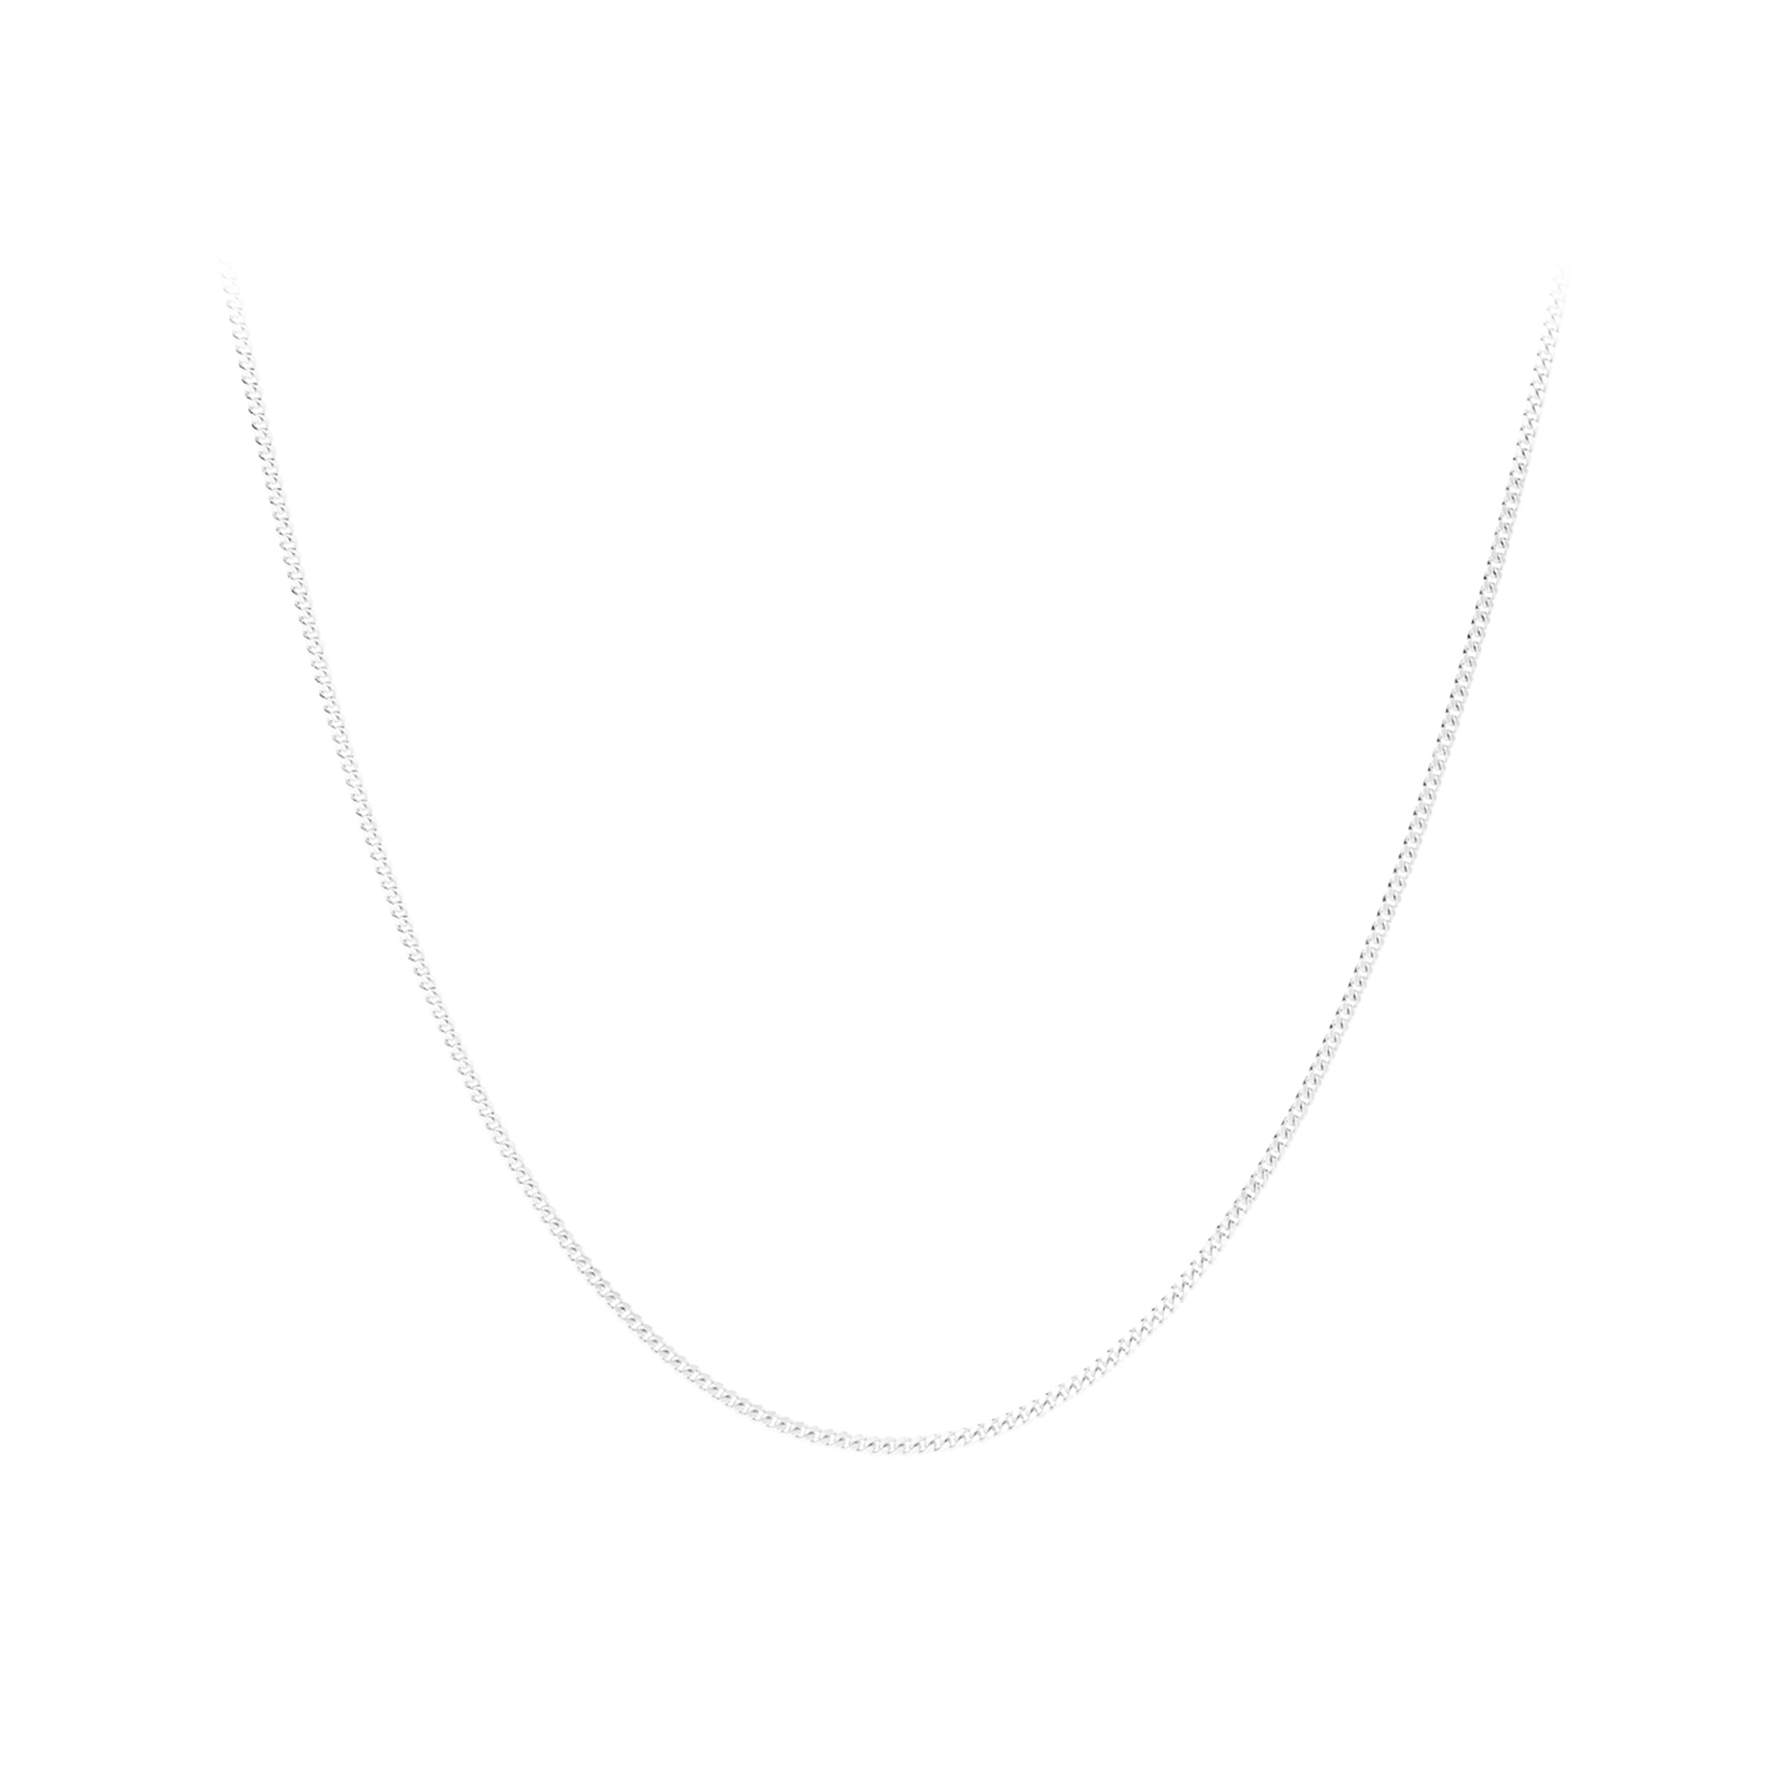 Ea Necklace von Pernille Corydon in Silber Sterling 925